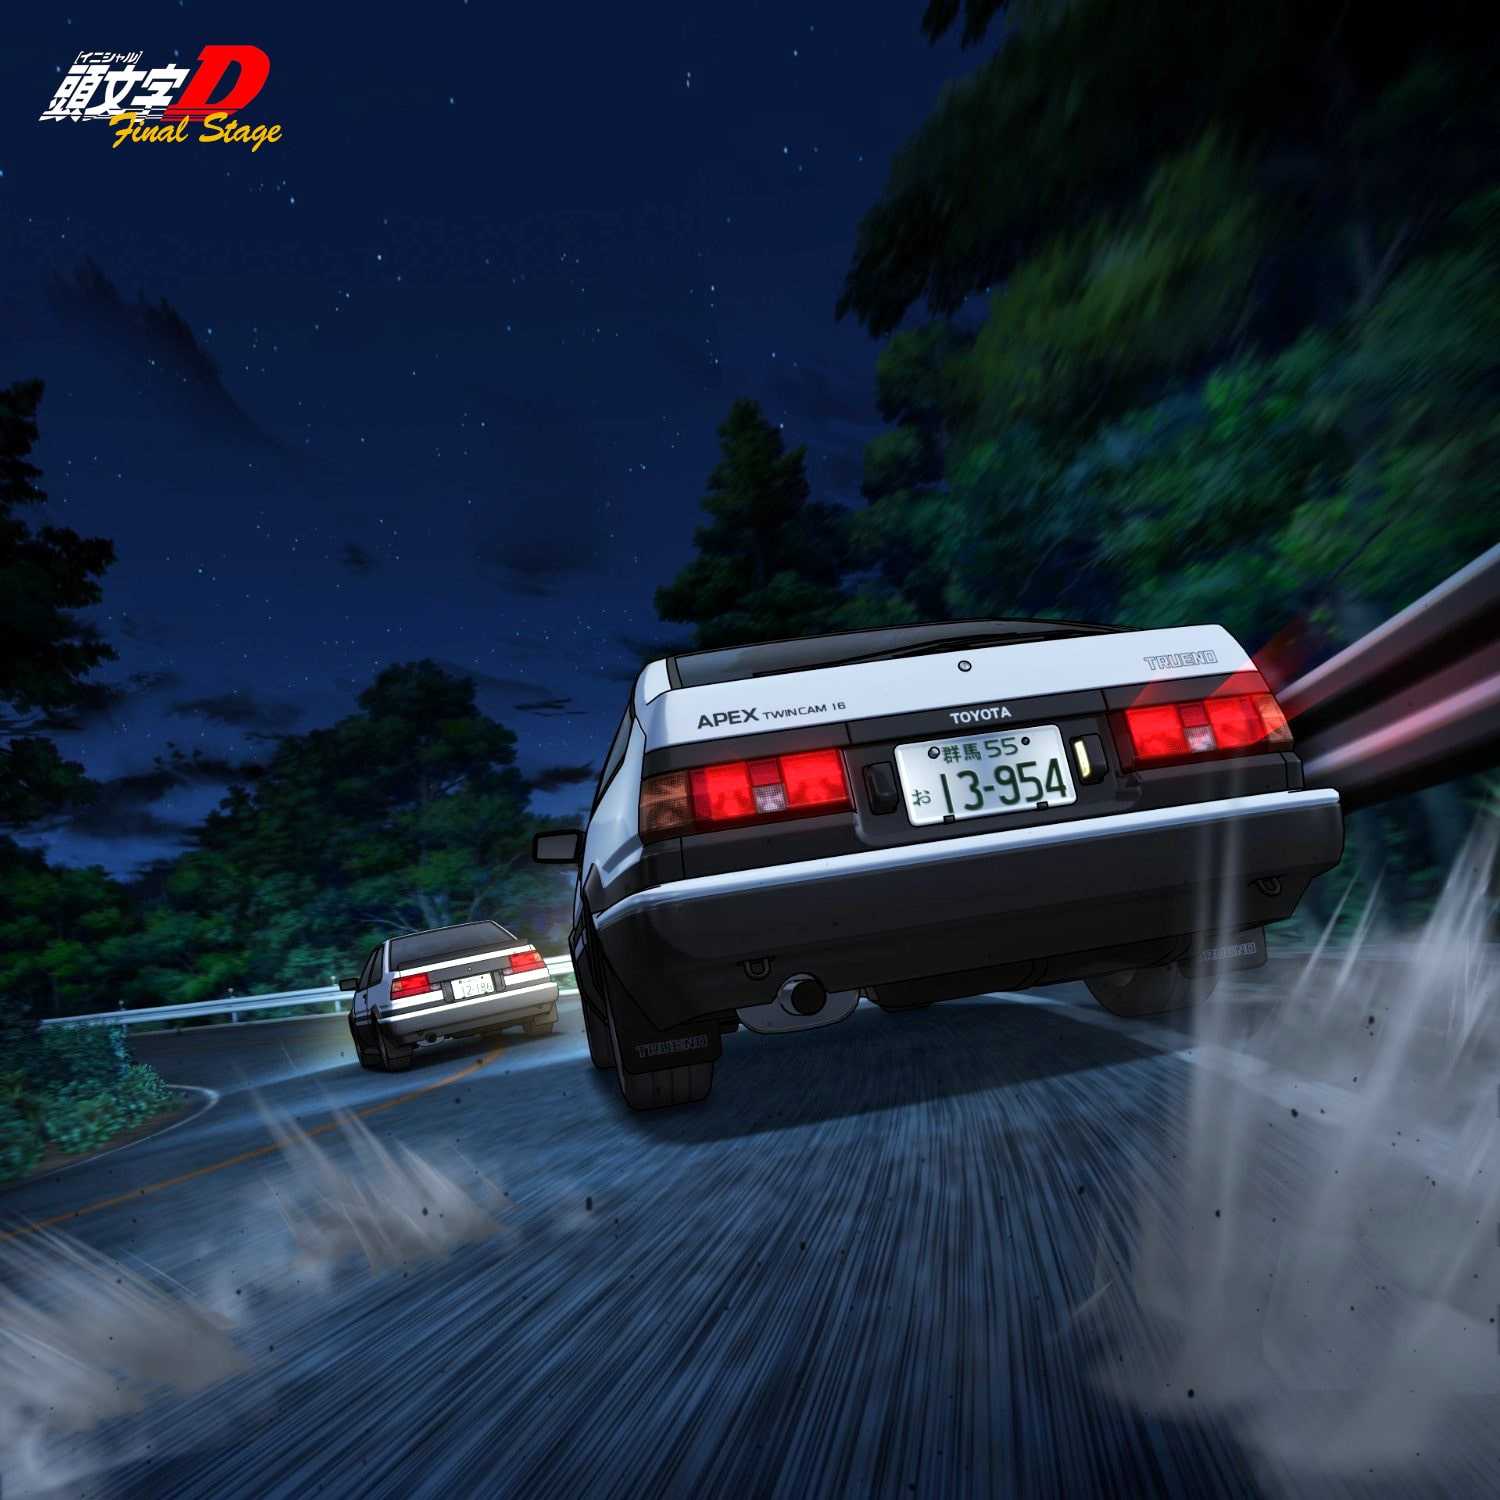 You guys might enjoy this as a phone wallpaper too  rinitiald